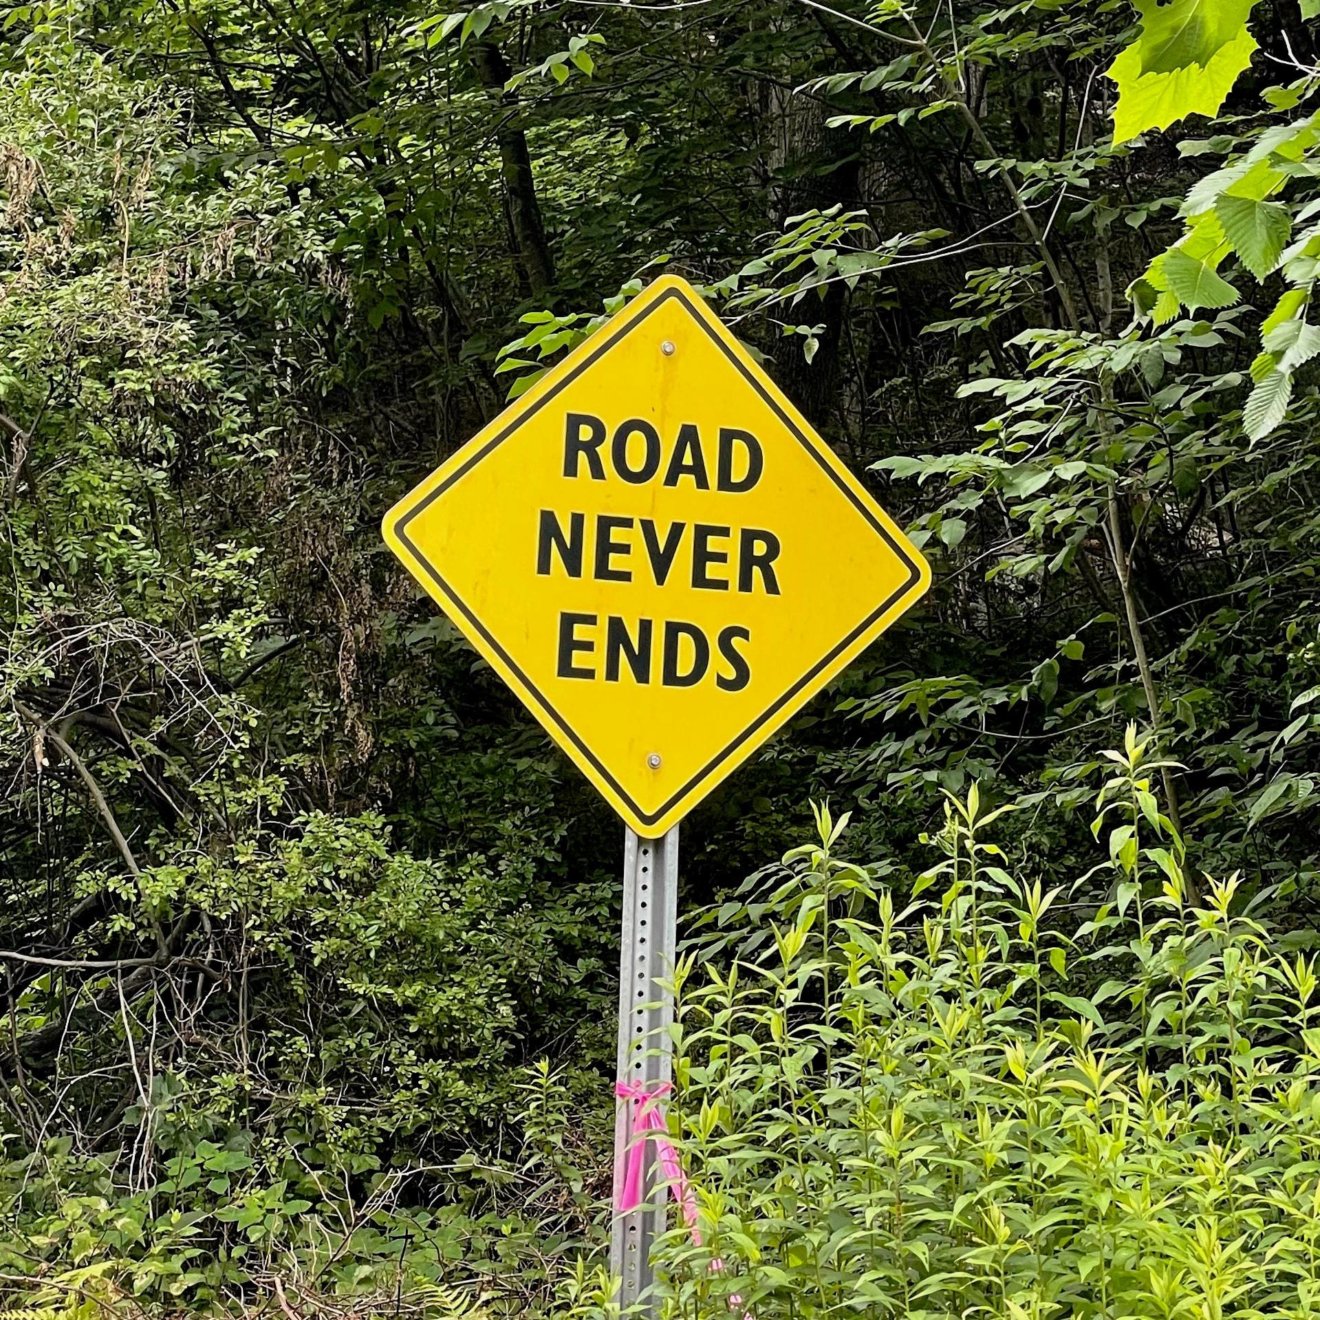 Road never ends